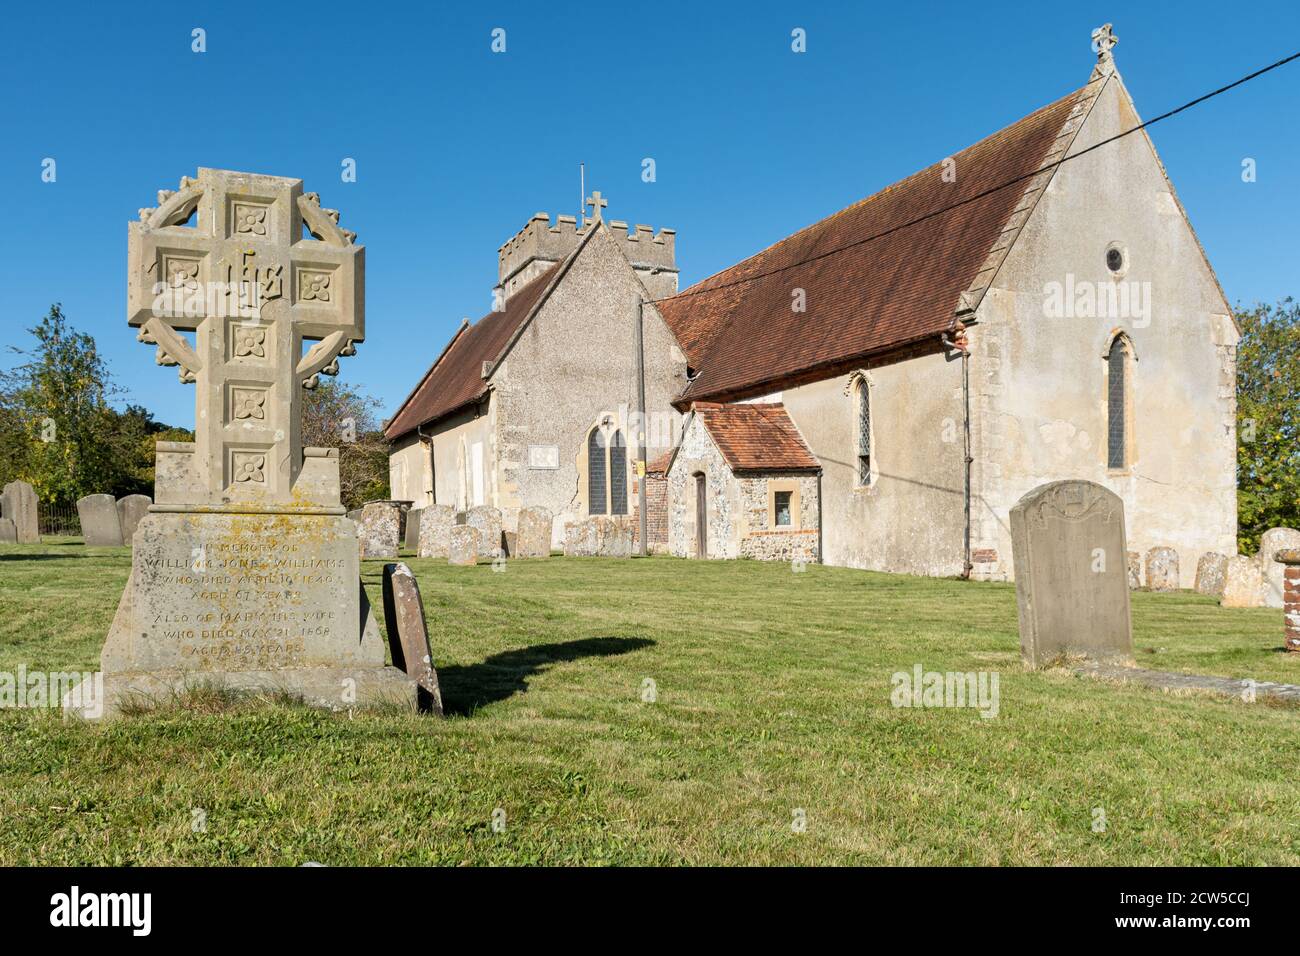 St Mary's Church, a grade 1 listed building in the village of East Ilsley, Berkshire, UK Stock Photo